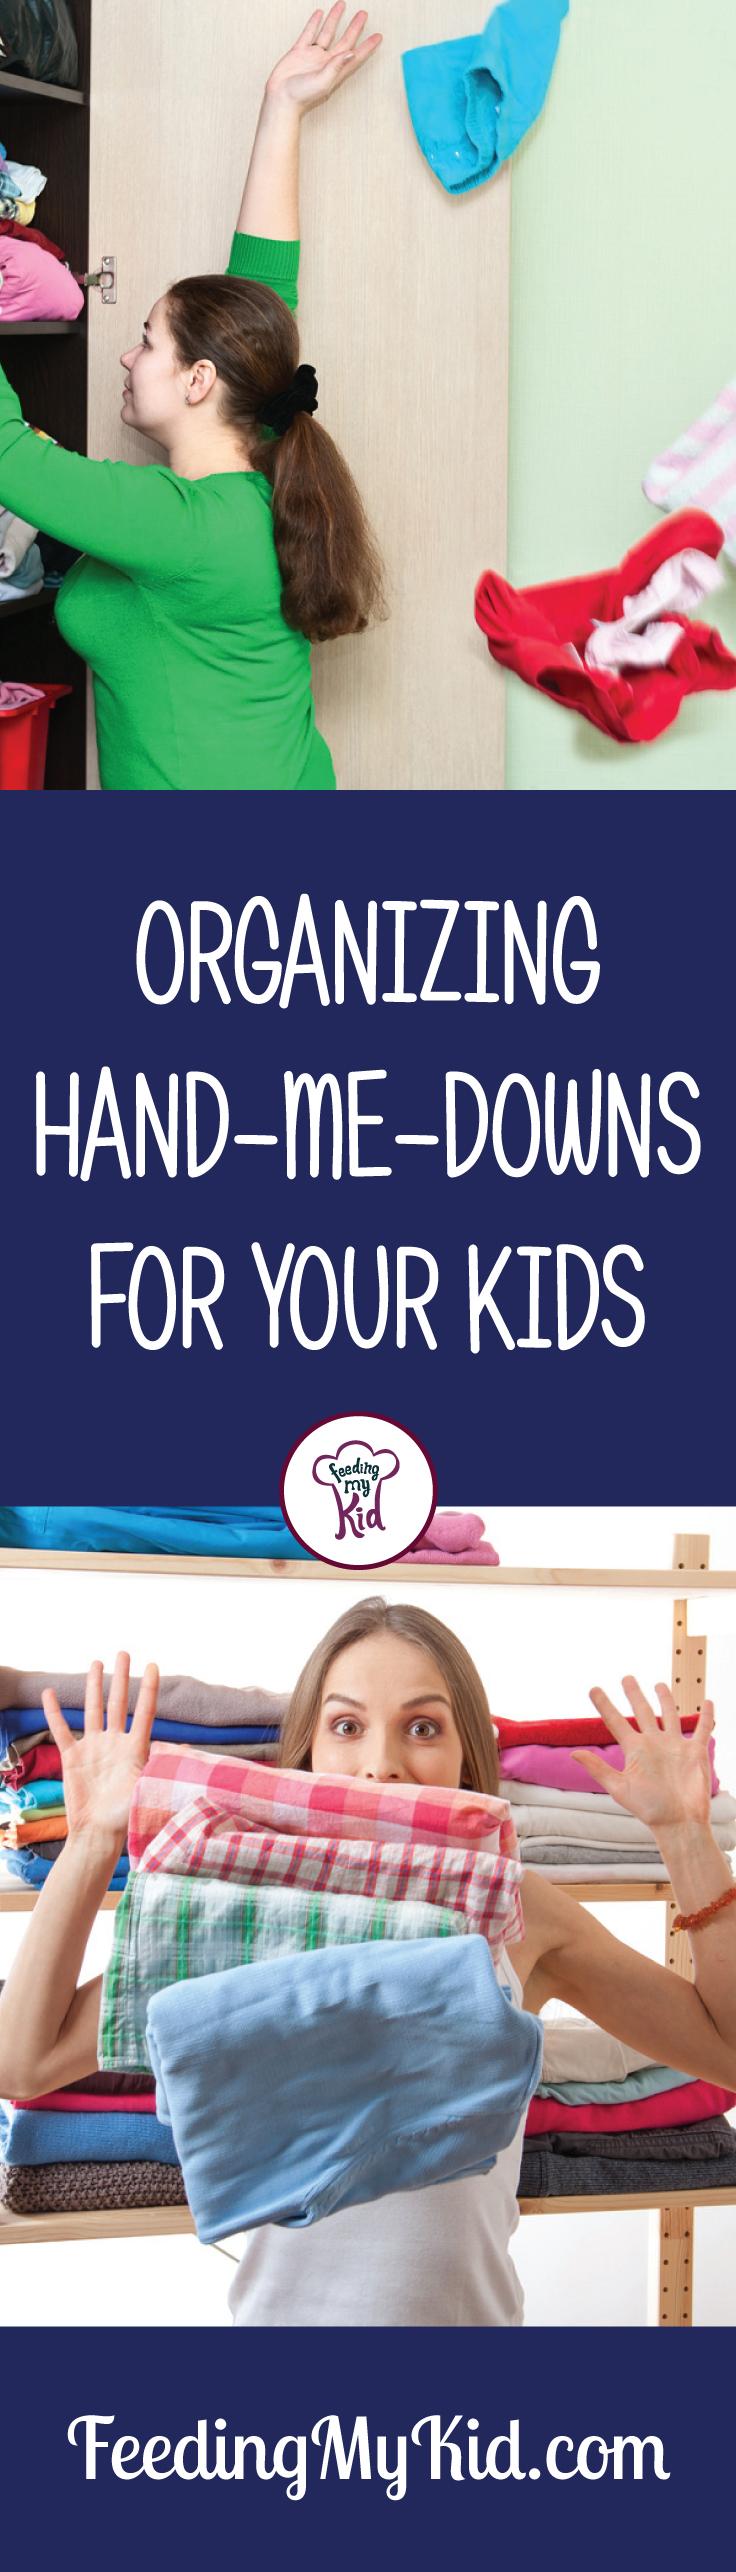 Put together hand-me-downs for your kids. These baby clothes organizer ideas and tips from What's Up Moms are super helpful for parents.